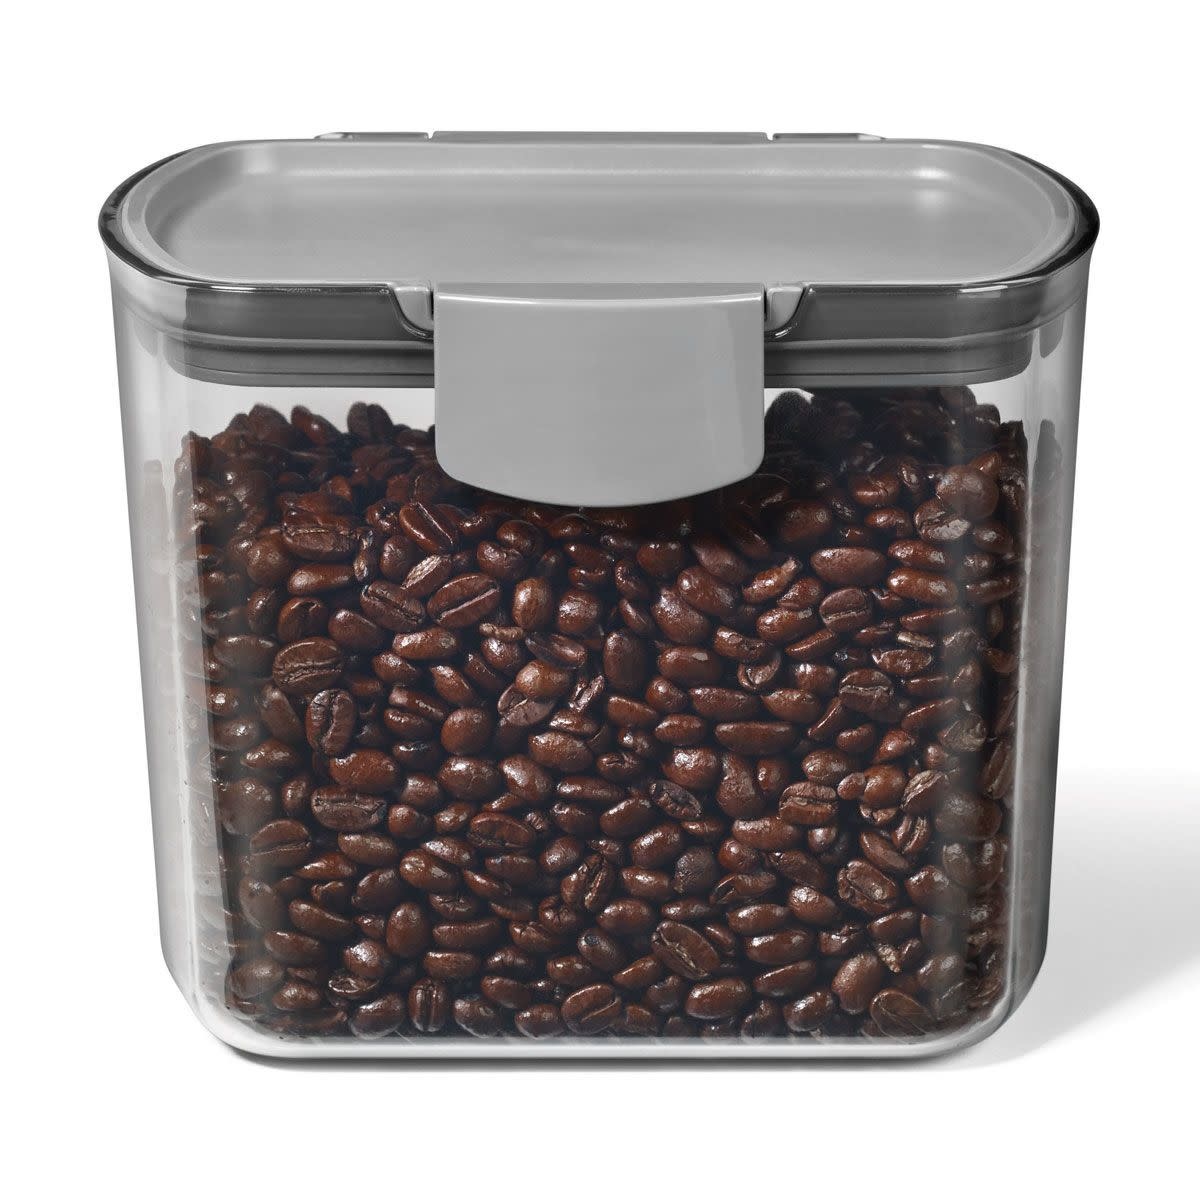 Starfrit ProKeeper 2.5lb Brown Sugar Container - Ares Kitchen and Baking  Supplies